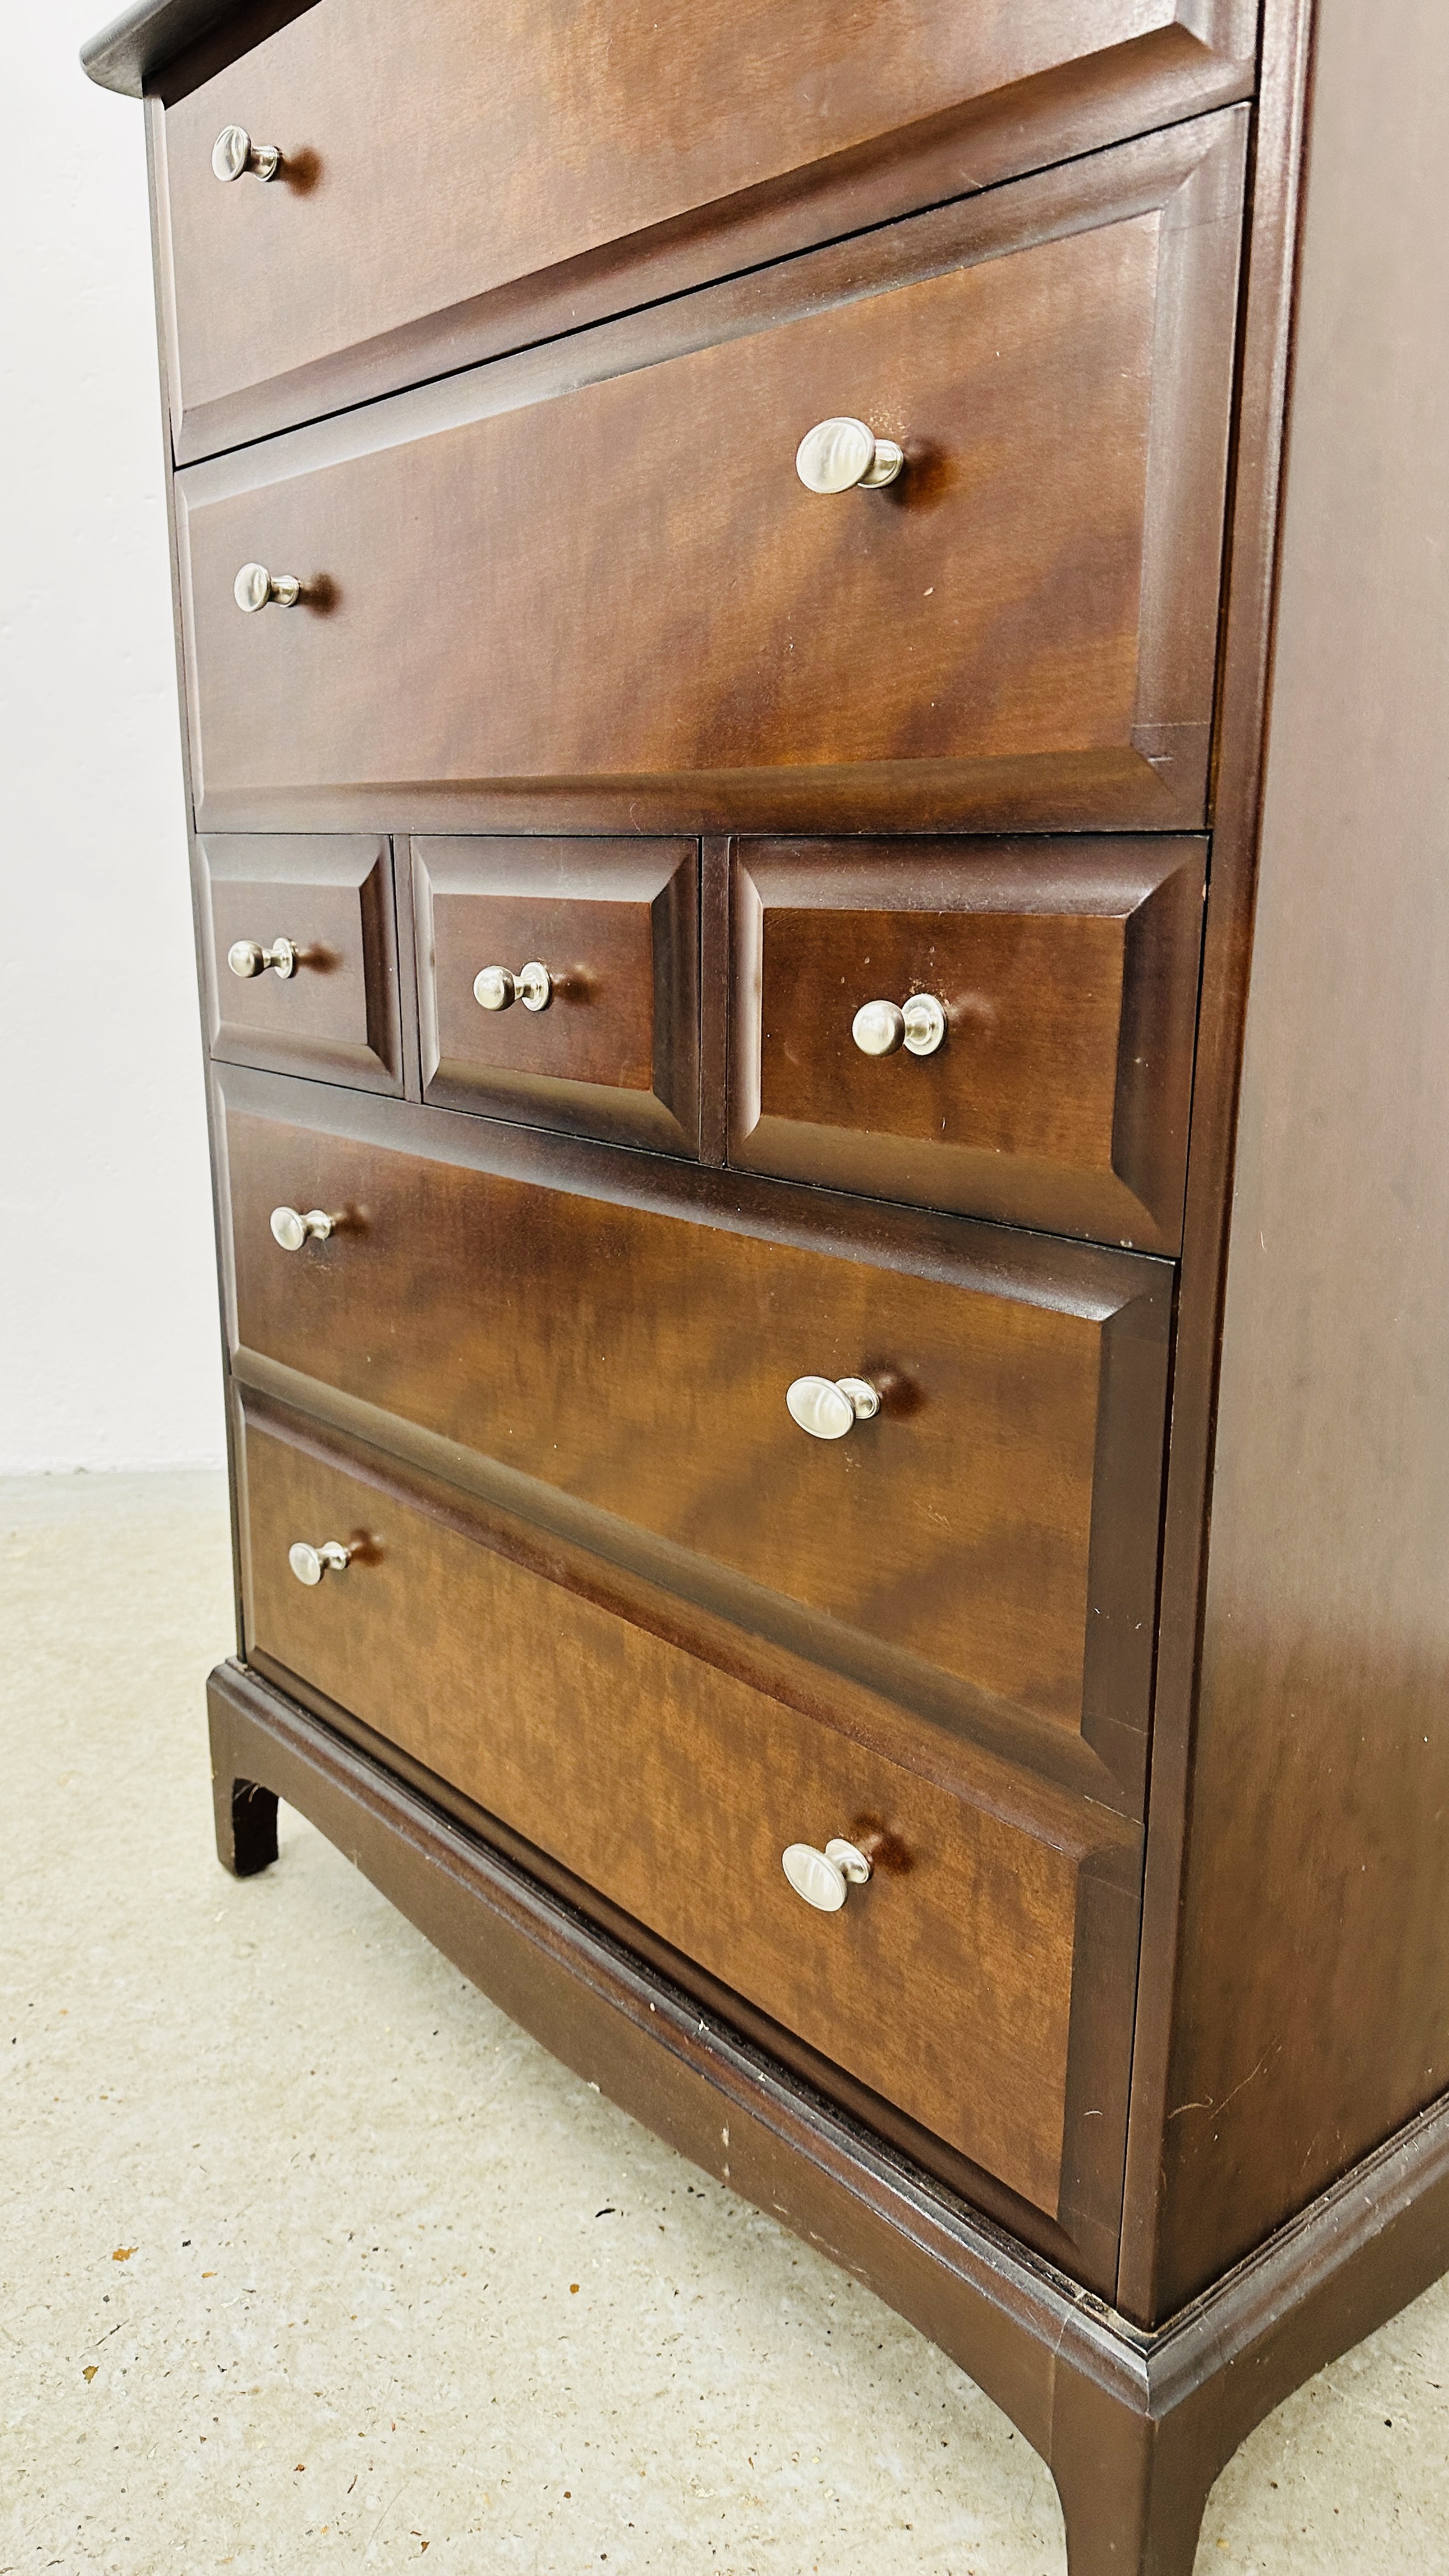 A STAG 7 MULTI DRAWER CHEST OF DRAWERS - W 82CM X D 46.5CM X H 110CM. - Image 6 of 7